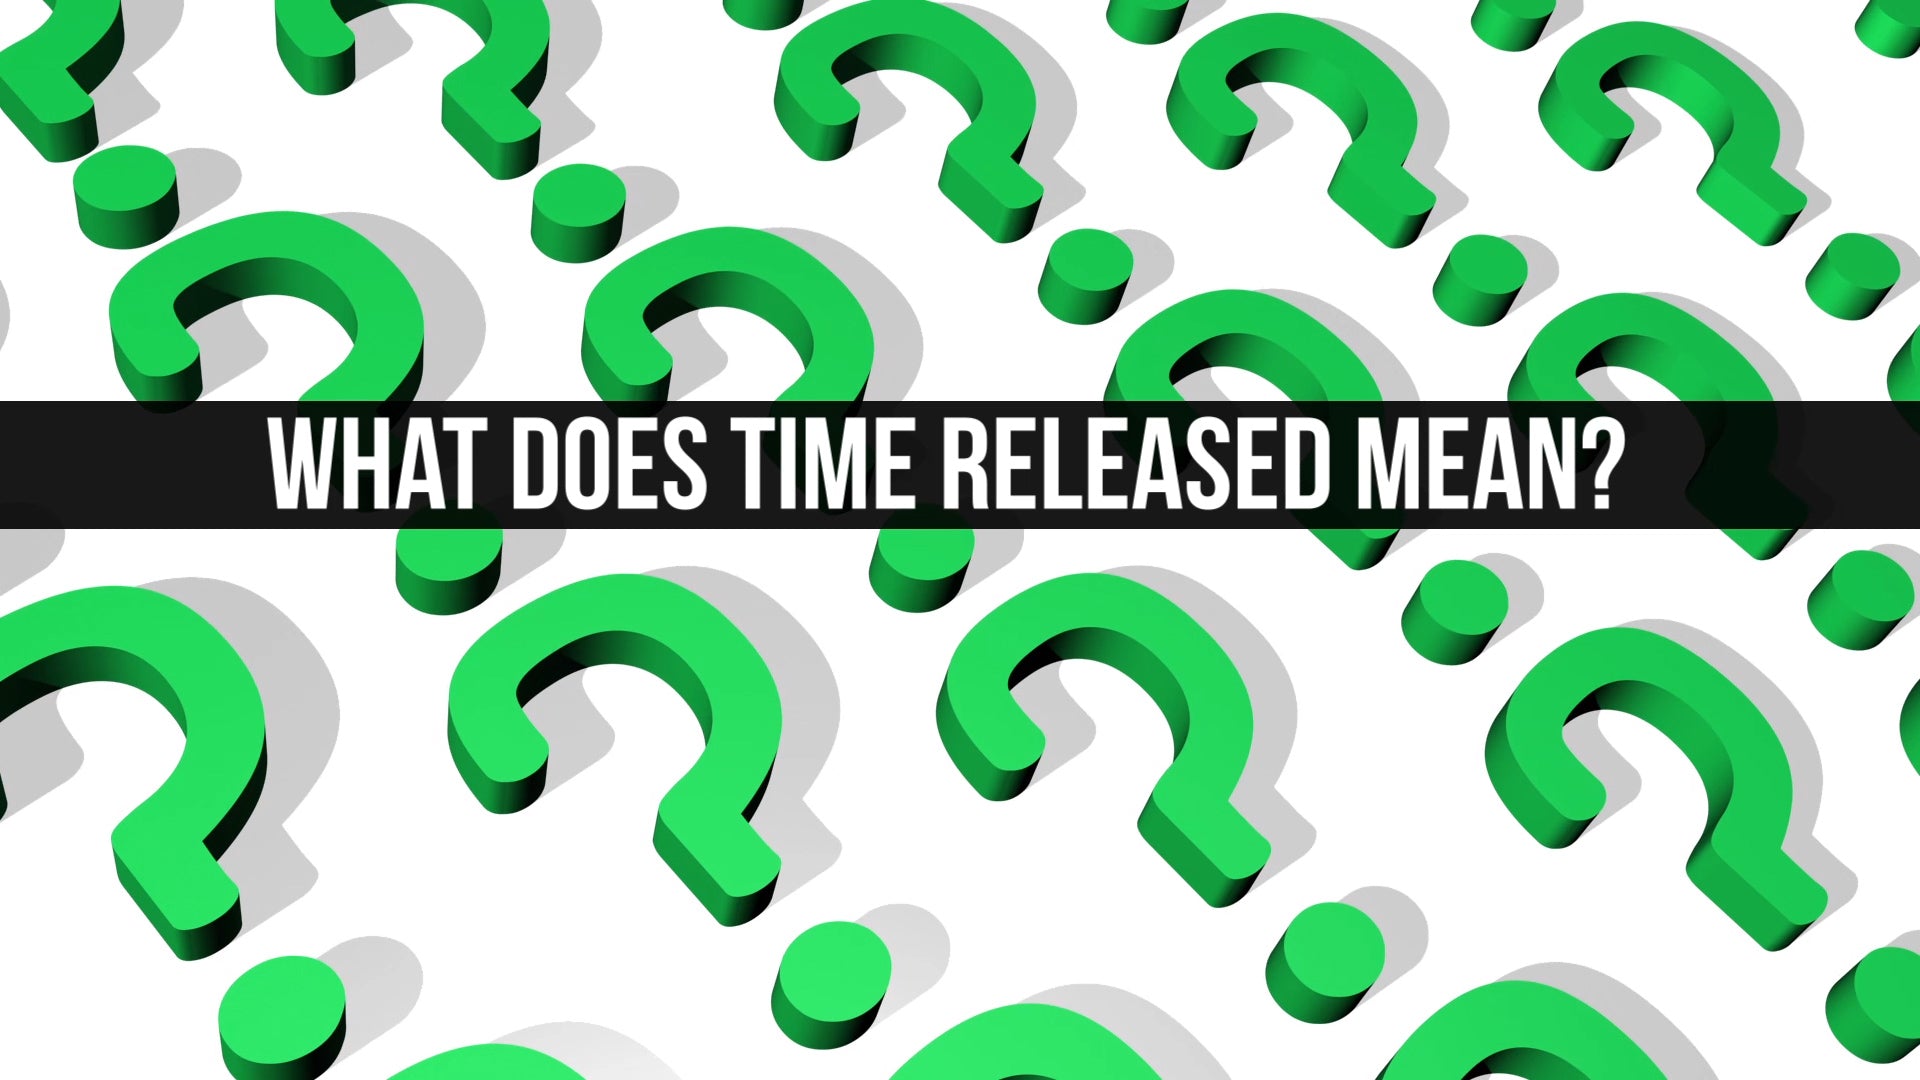 What Does "Time-Released" Mean?